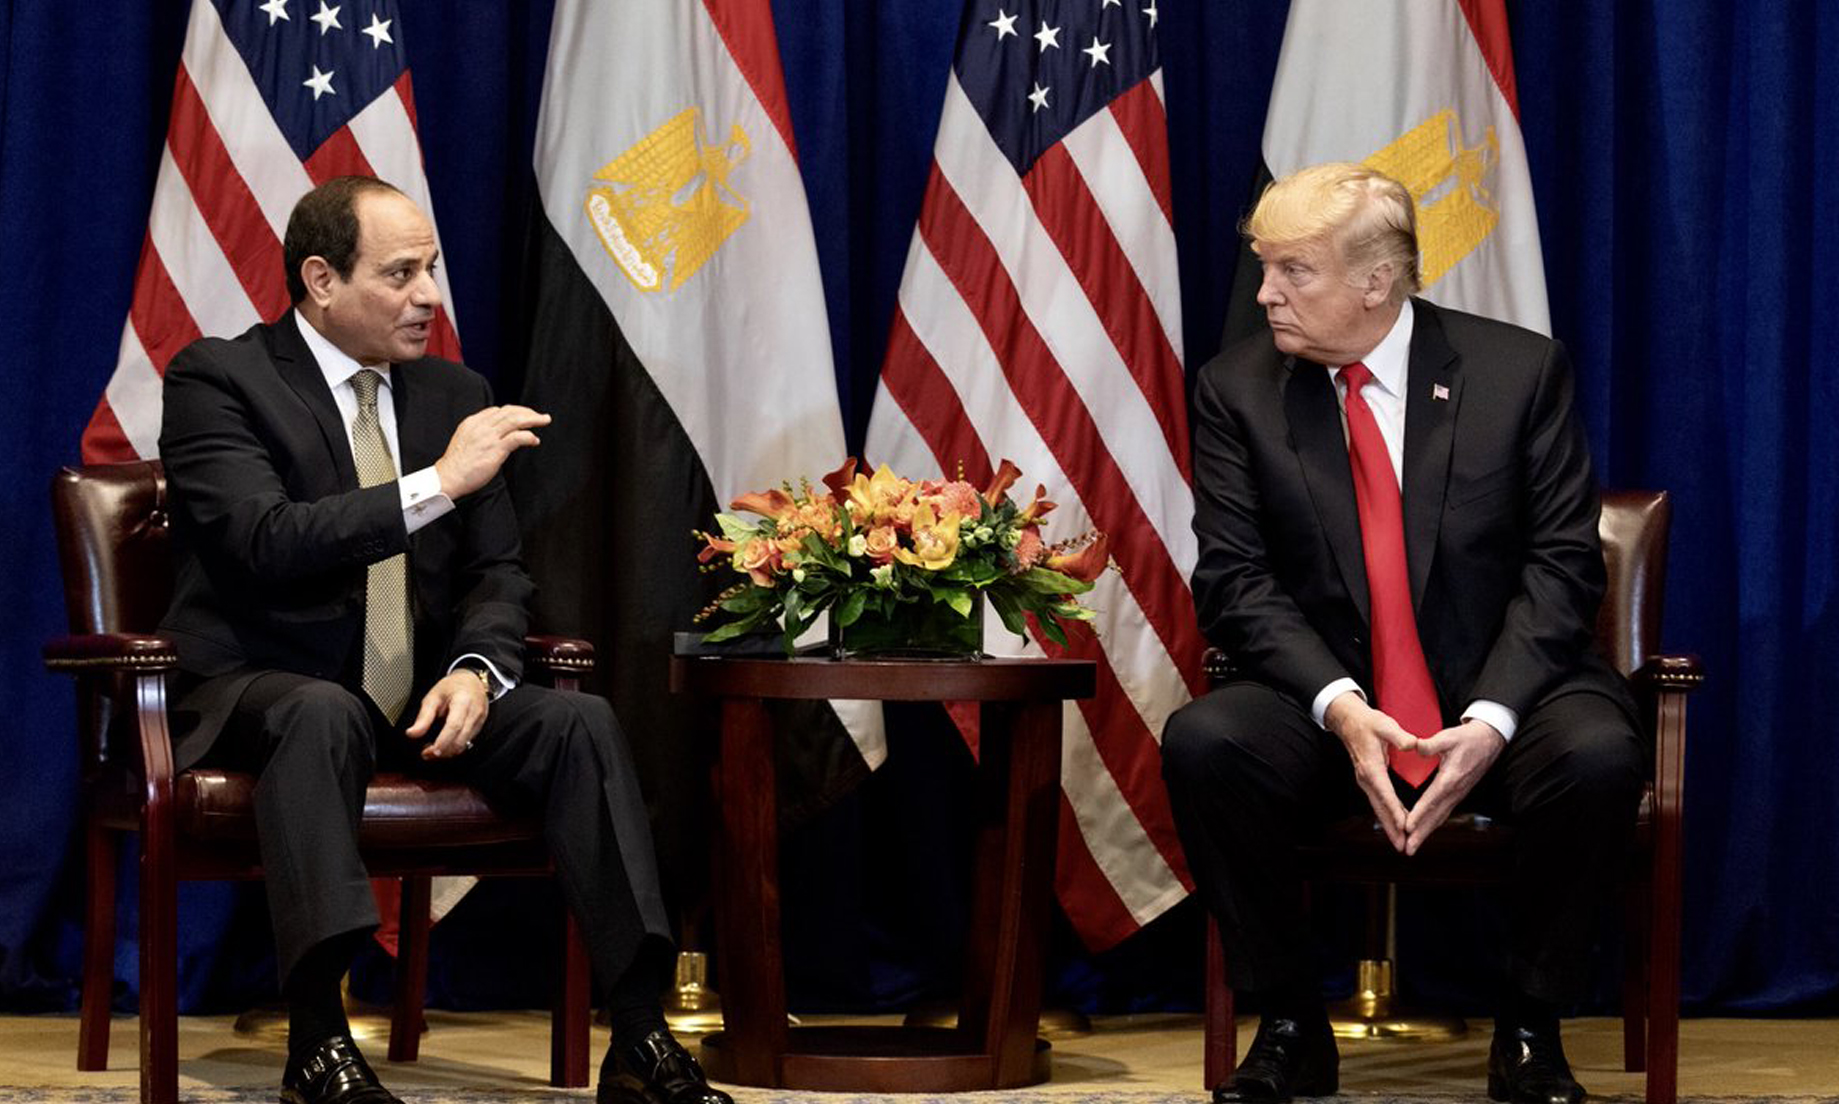 Trump hails ‘Great President’ Al-Sisi during White House meeting